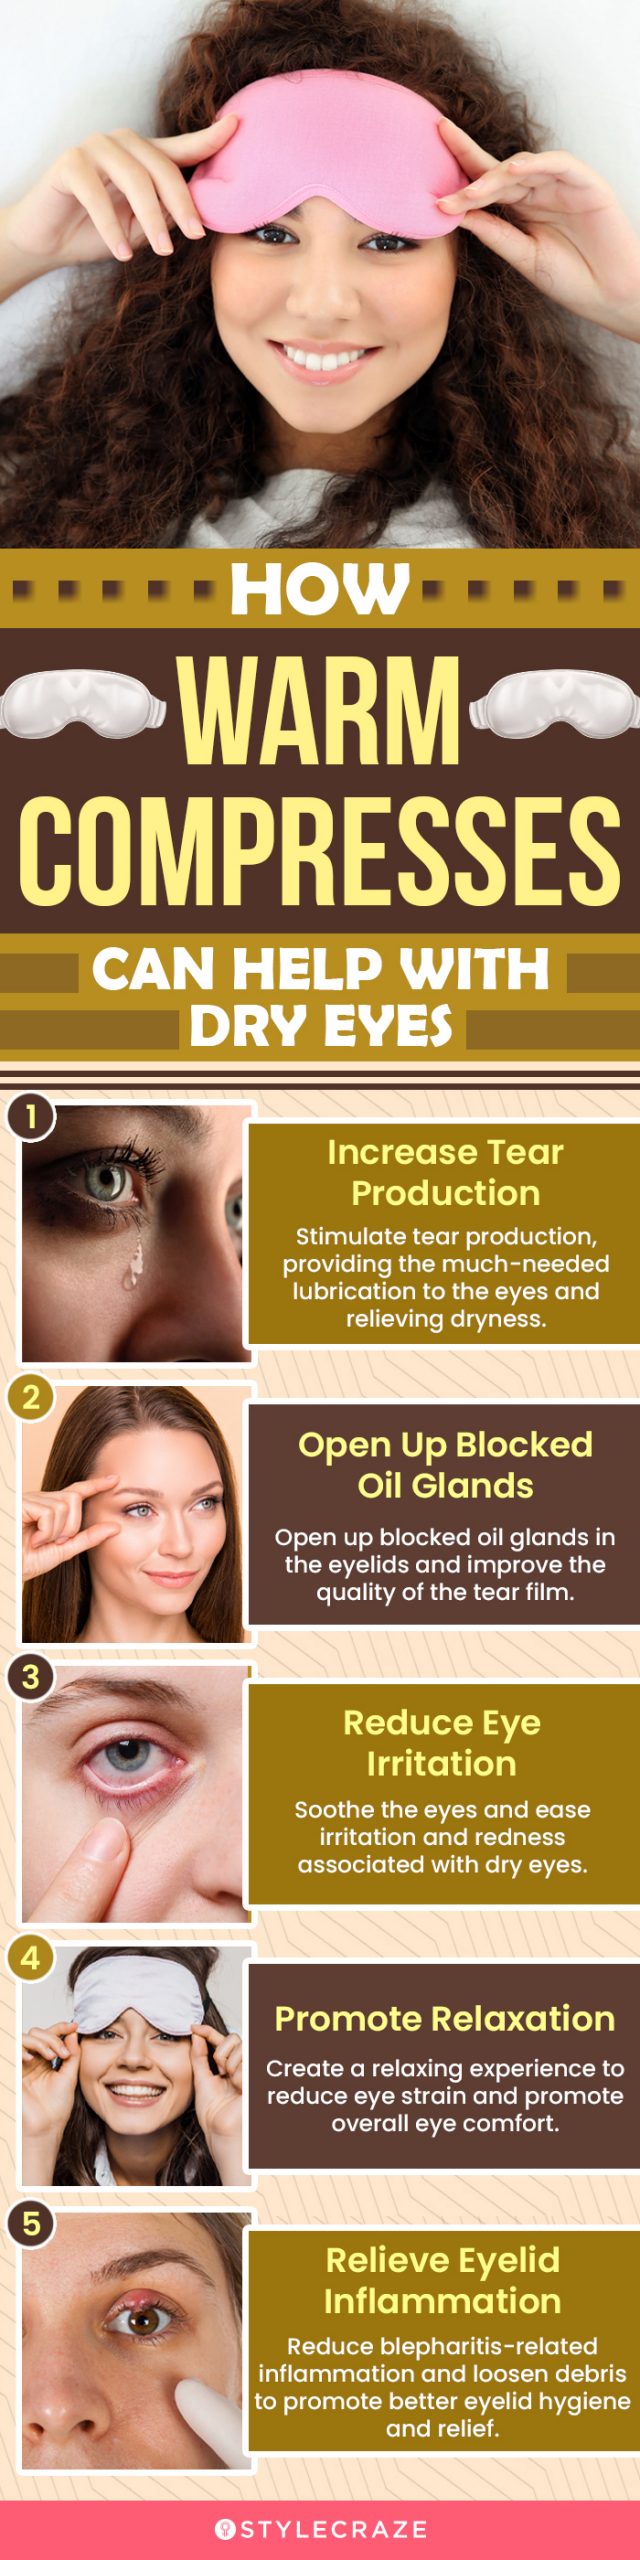 How Warm Compresses Can Help With Dry Eyes (infographic)